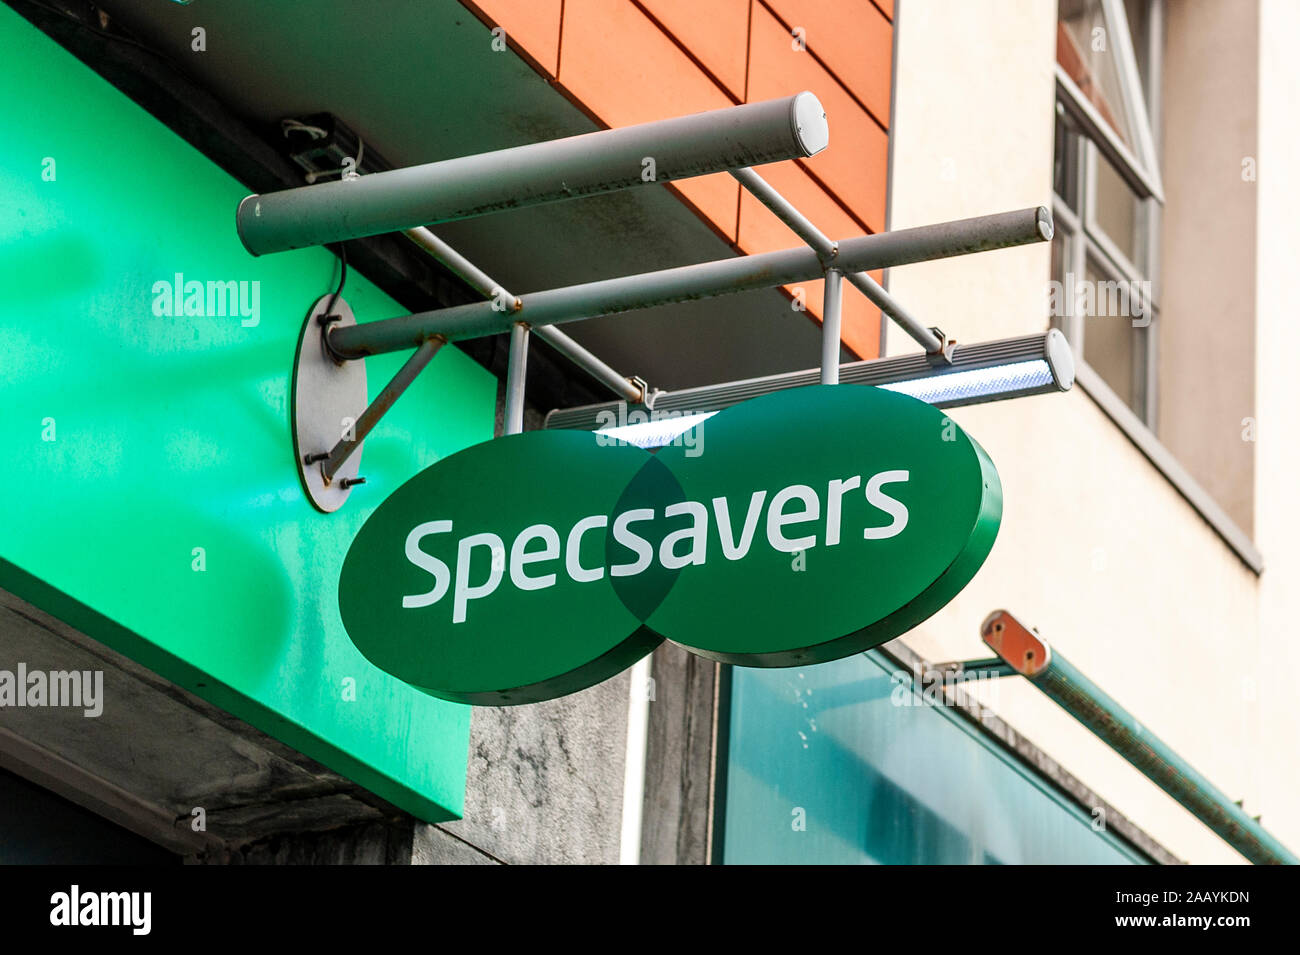 Specsavers opticians store front sign Stock Photo